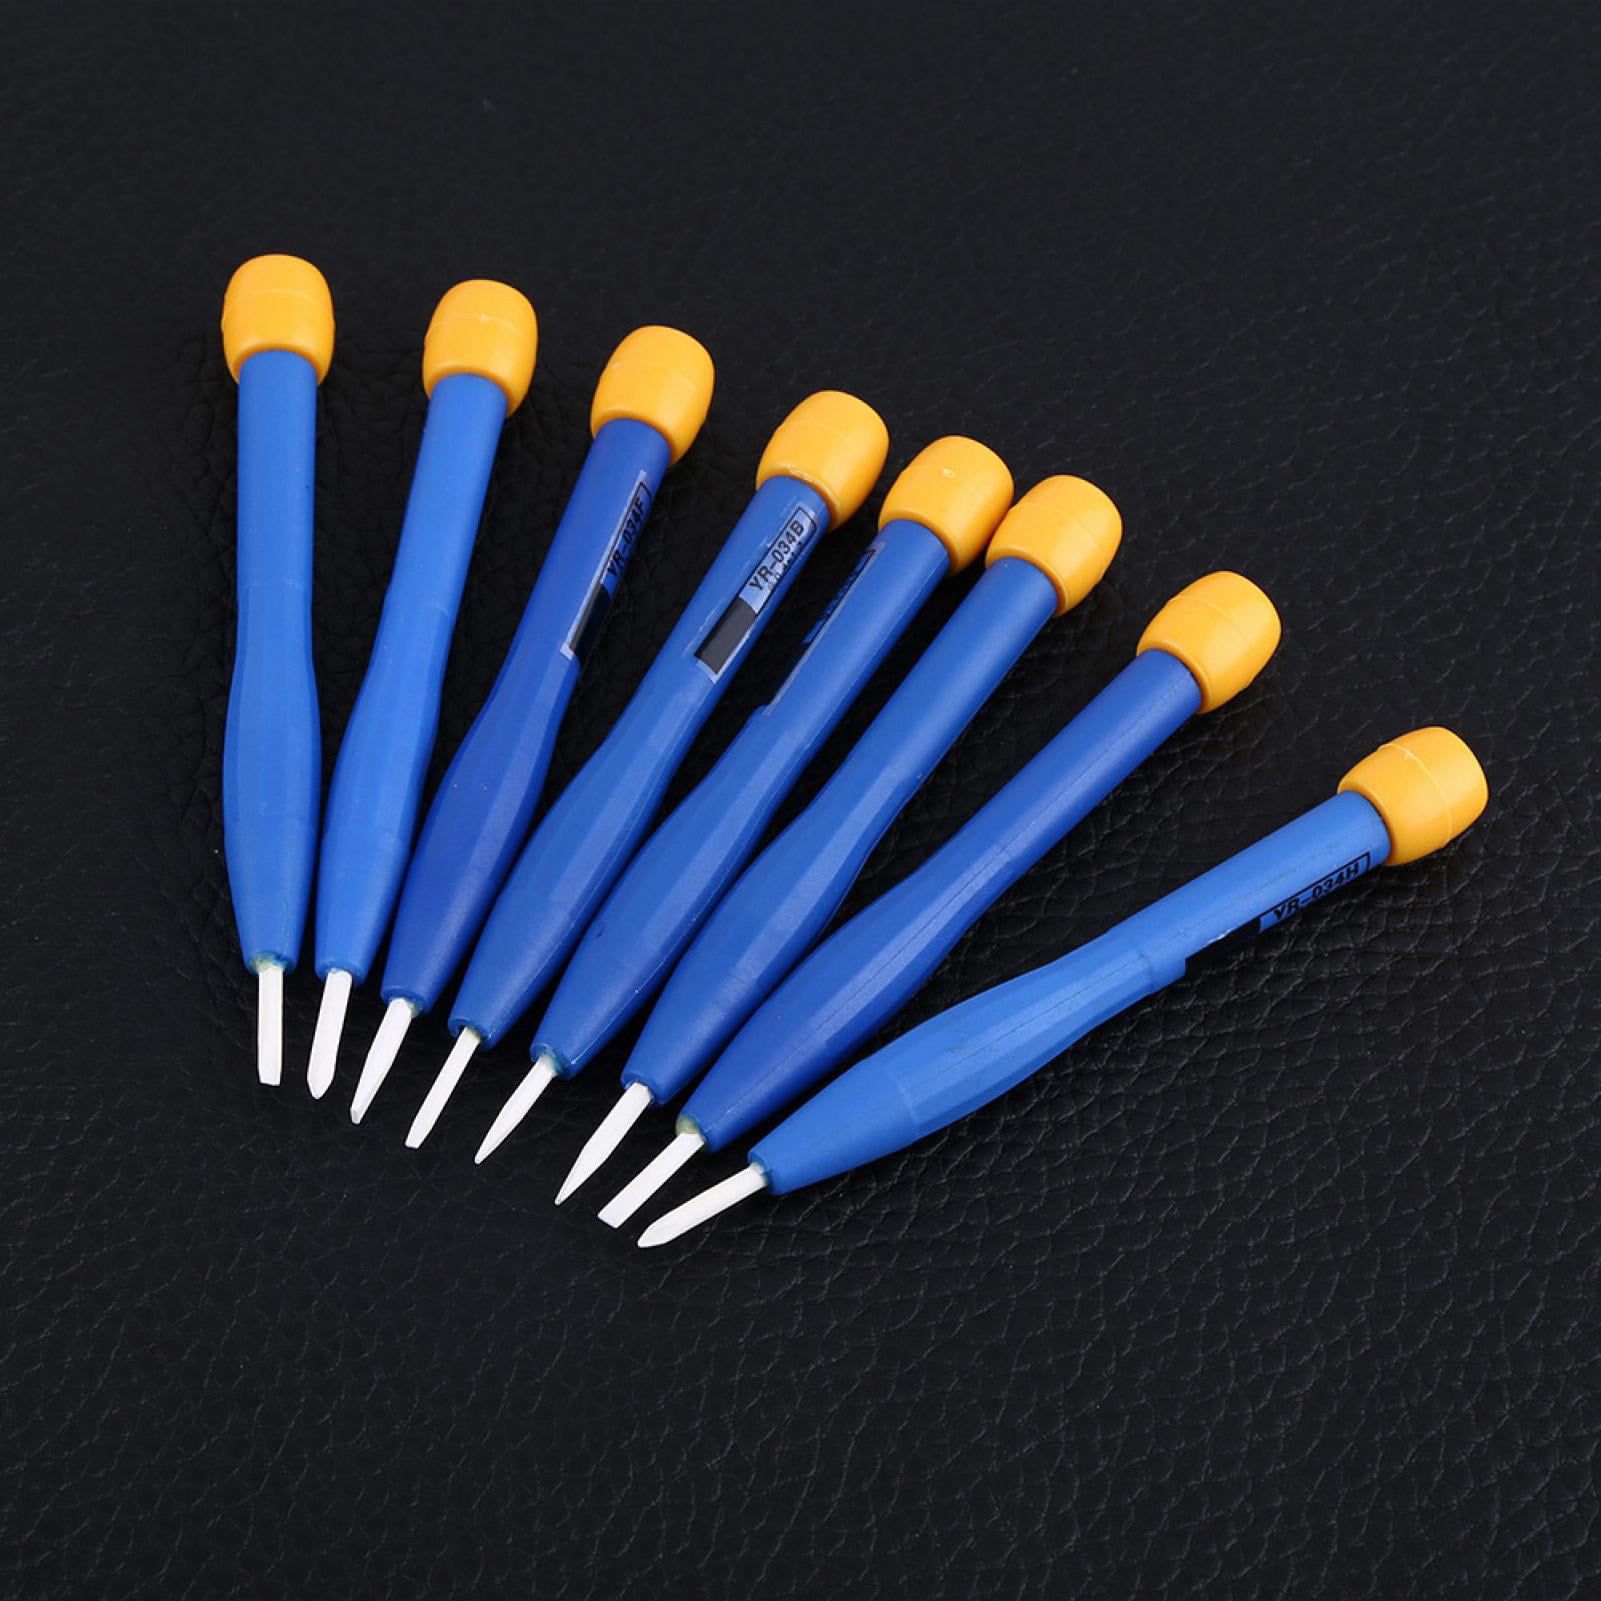 8PCS Adjust Frequency Screwdriver Anti-static Plastic Ceramic Set Slotted and… 